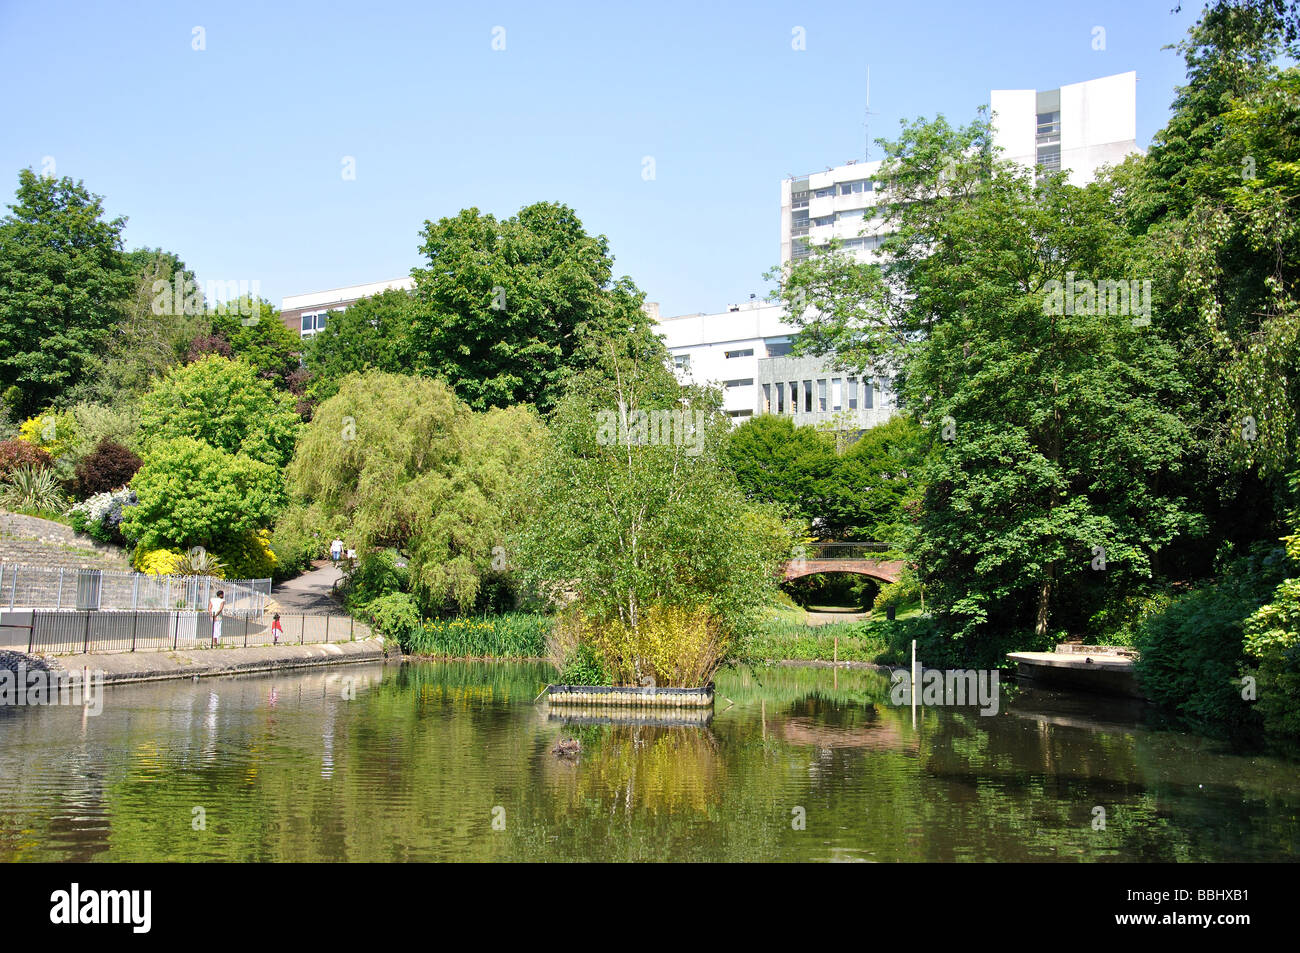 View of lake, Bromley Park, Bromley, The London Borough of Bromley, Greater London, England, United Kingdom Stock Photo